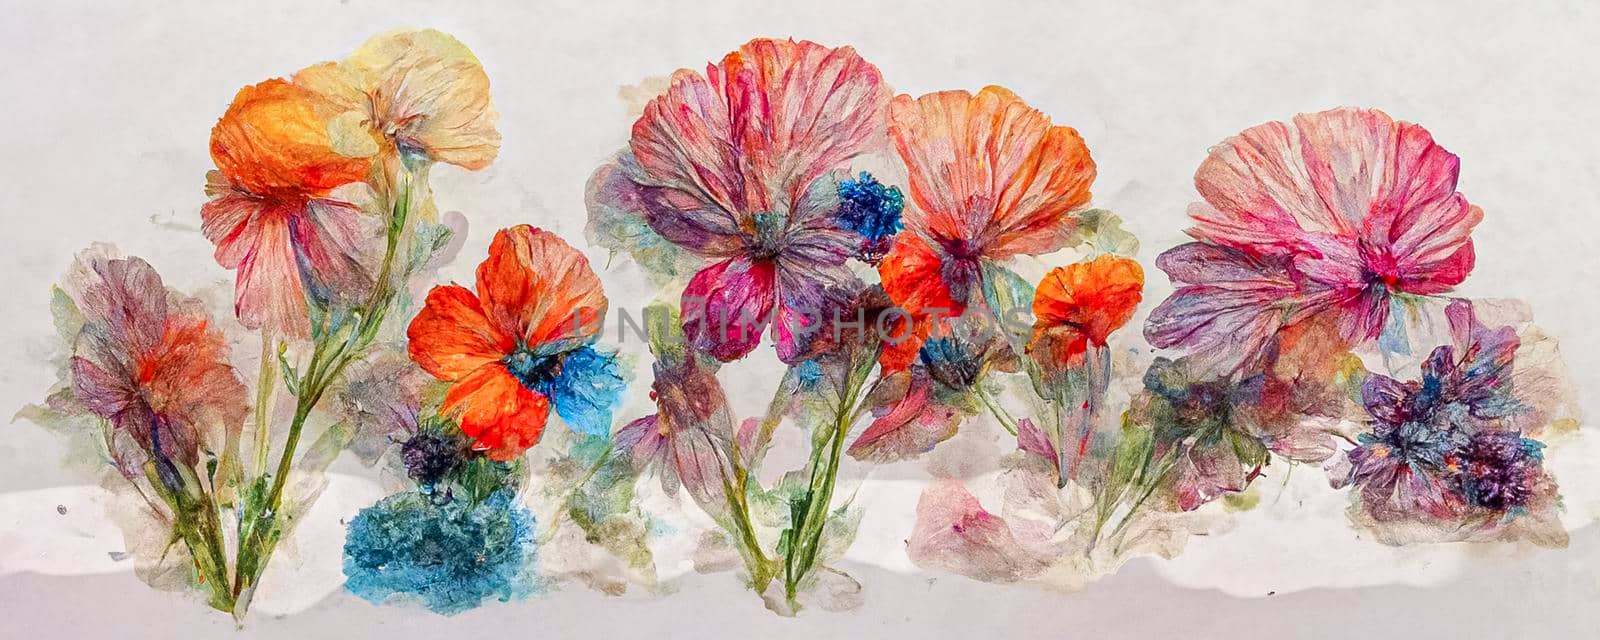 Luxury art in abstract flower style. Artistic design. The painter uses vibrant paints to create this magical floral art